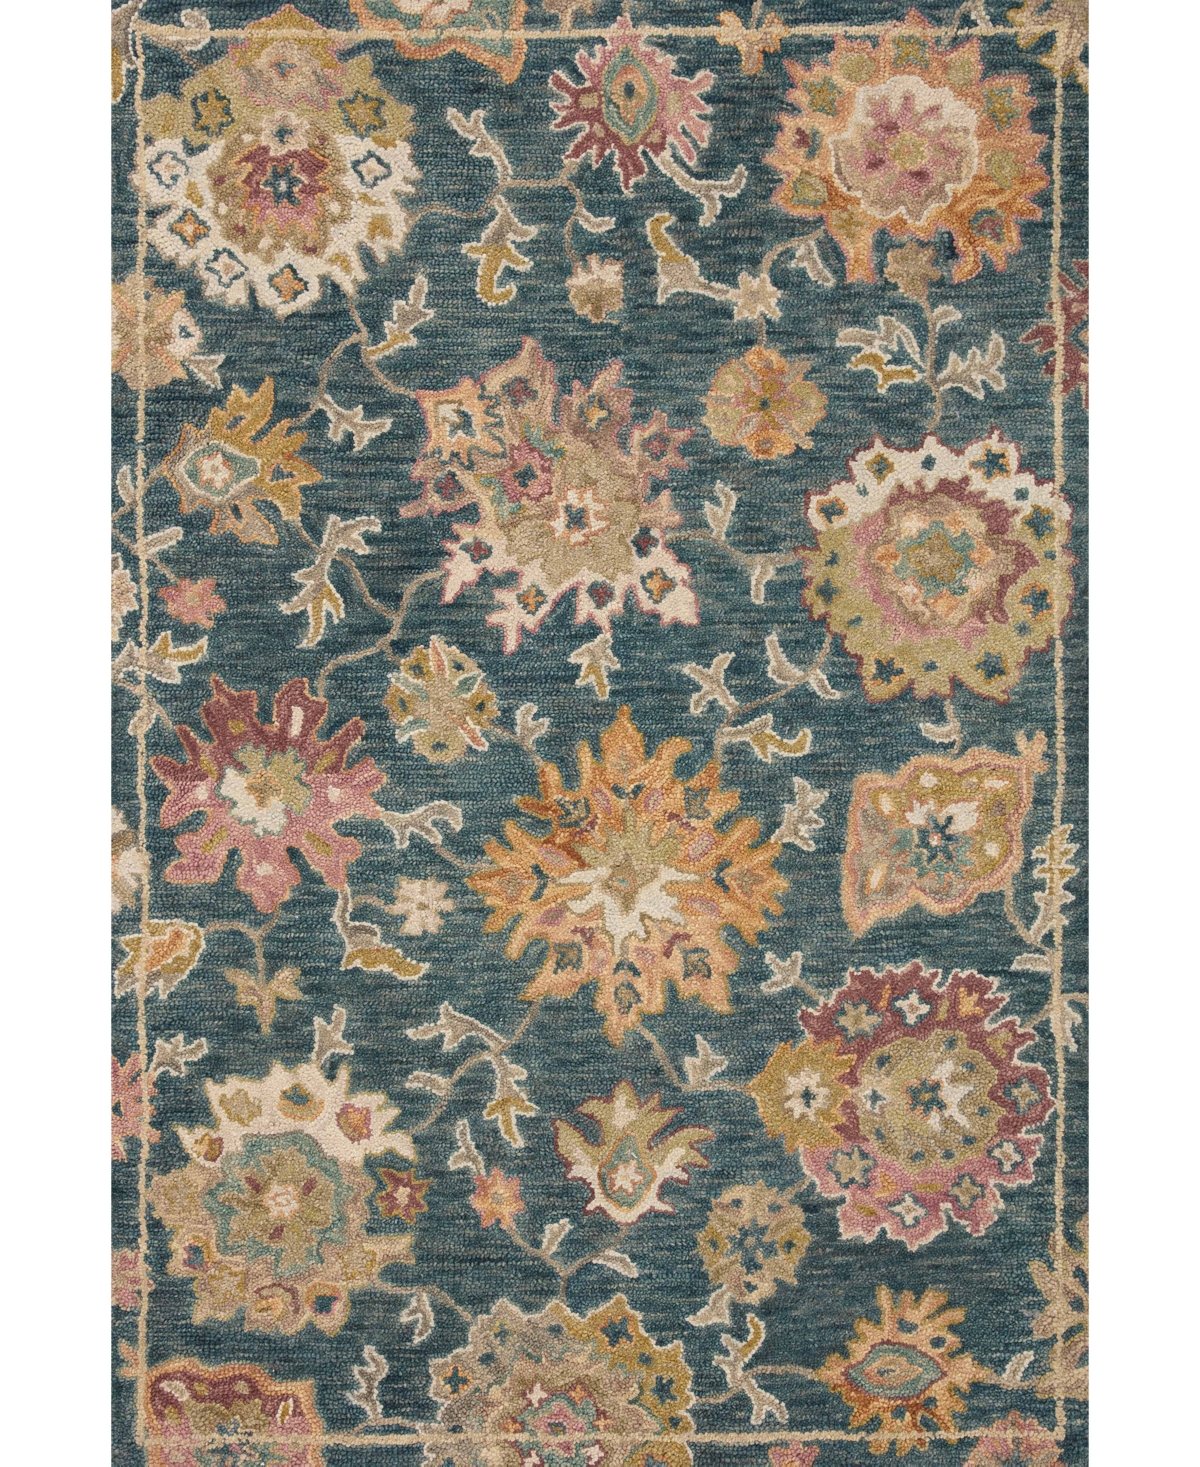 Spring Valley Home Lotus Lts-03 2'3" X 3'9" Area Rug In Navy/multi